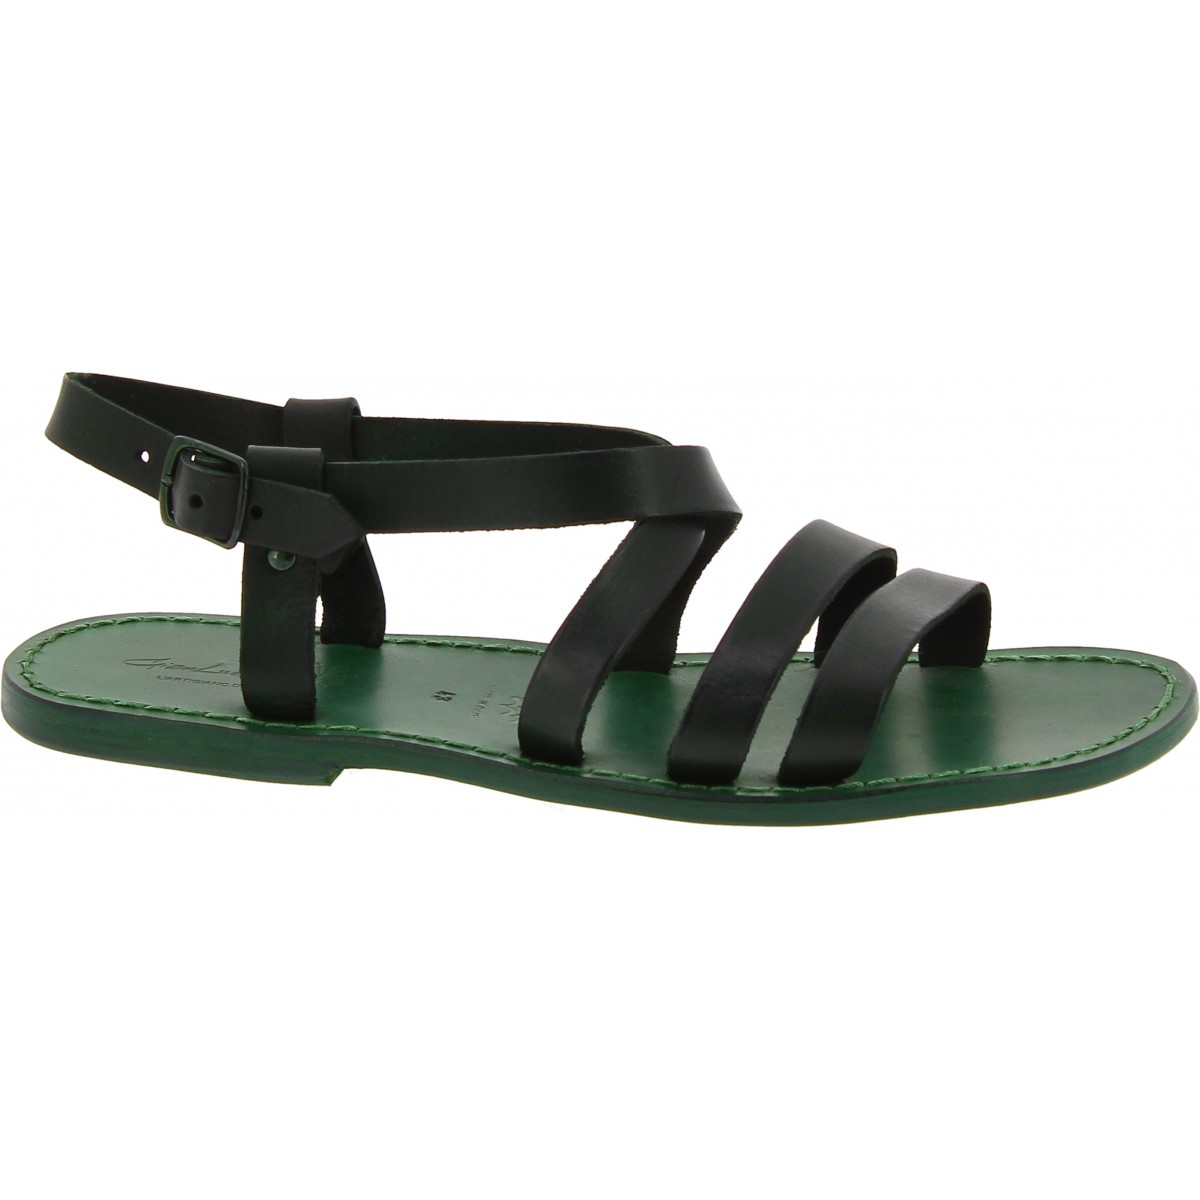 Men's green leather sandals Handmade in Italy | The leather craftsmen